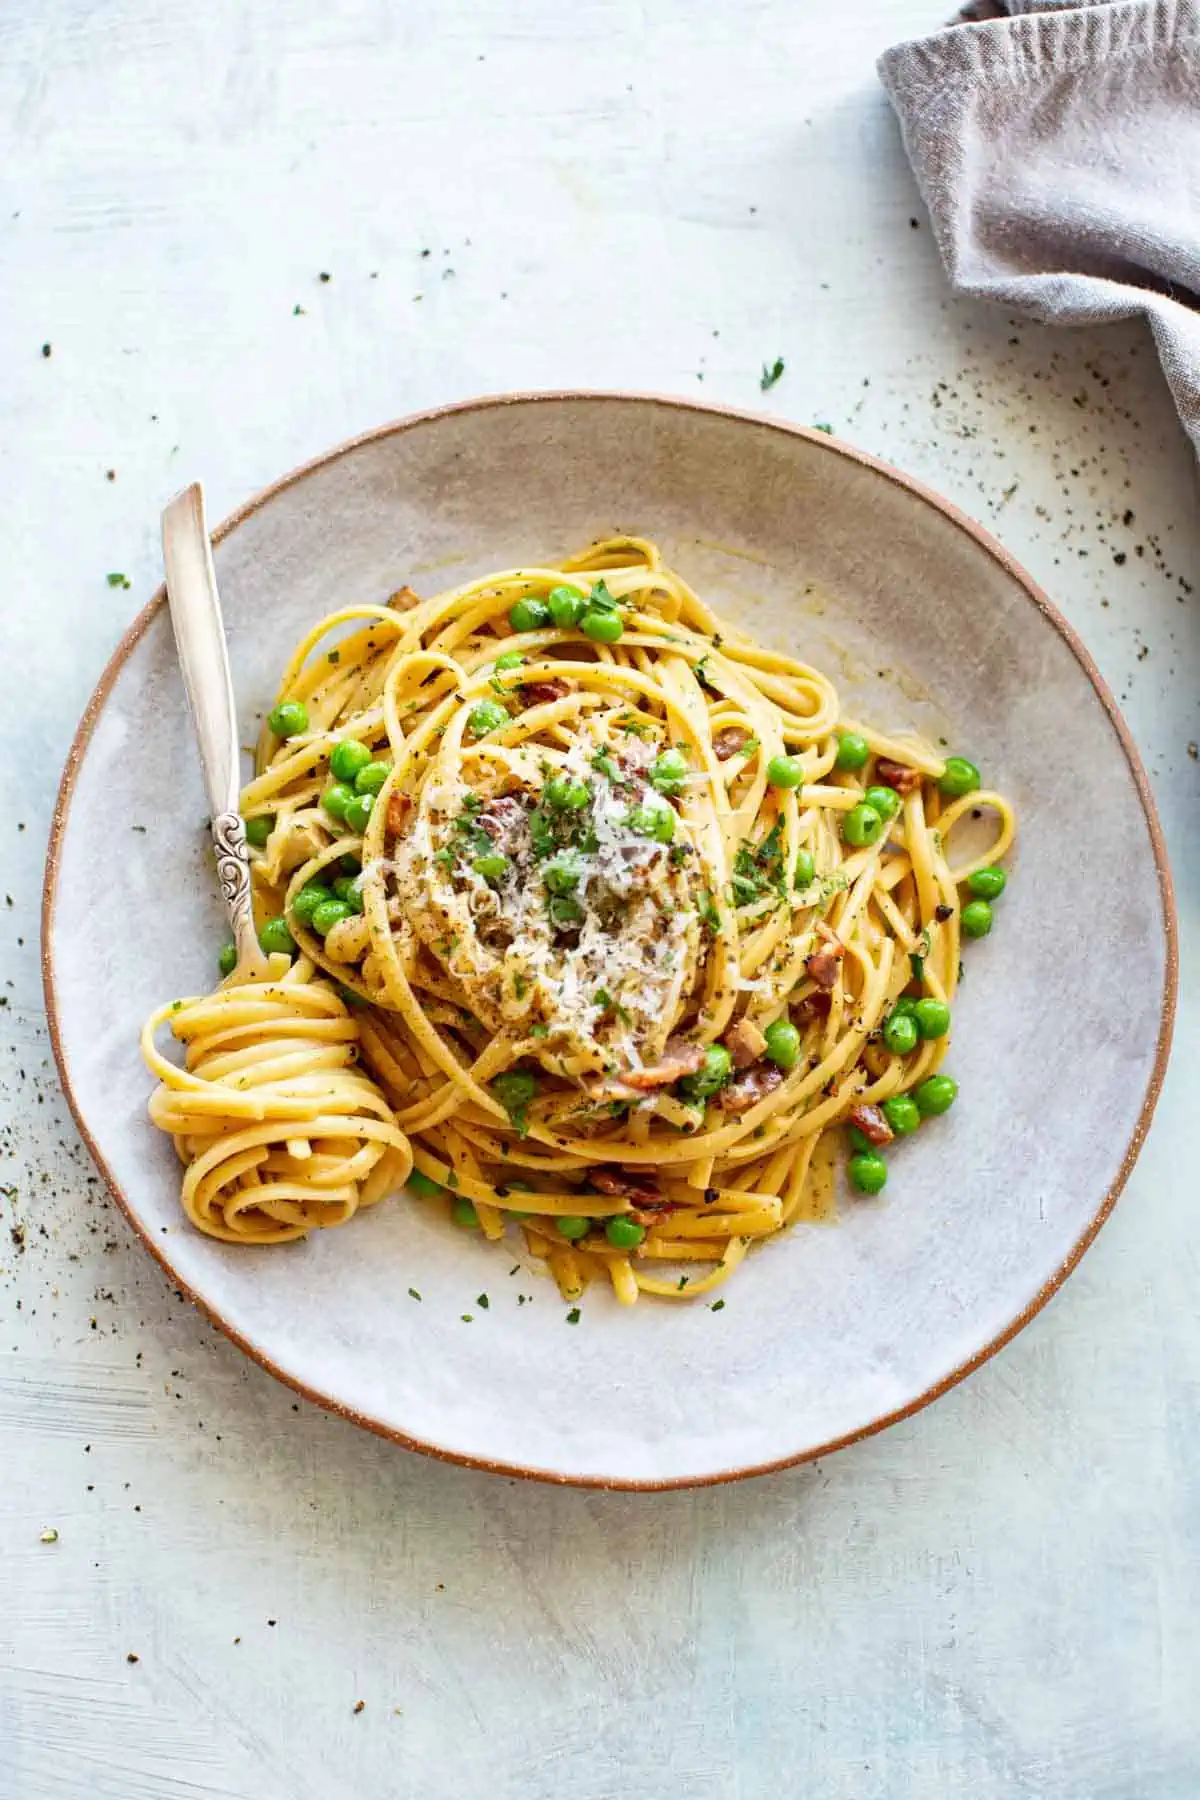 A plate of pasta carbonara with peas and a fork with pasta twisted around it.